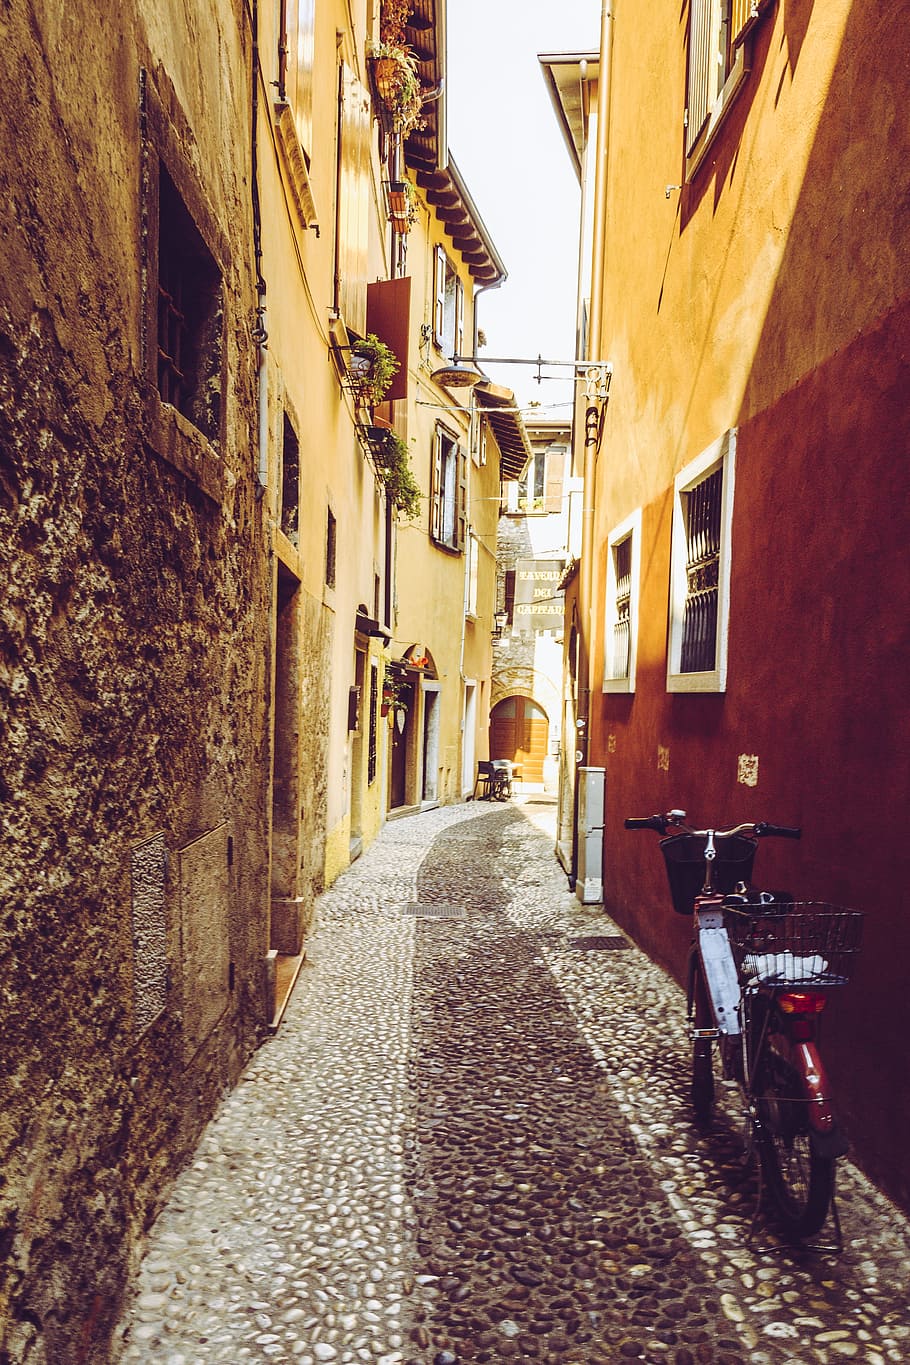 italy, alley, 70 years, moped, roller, old town, substantiate, passage, sicily, village